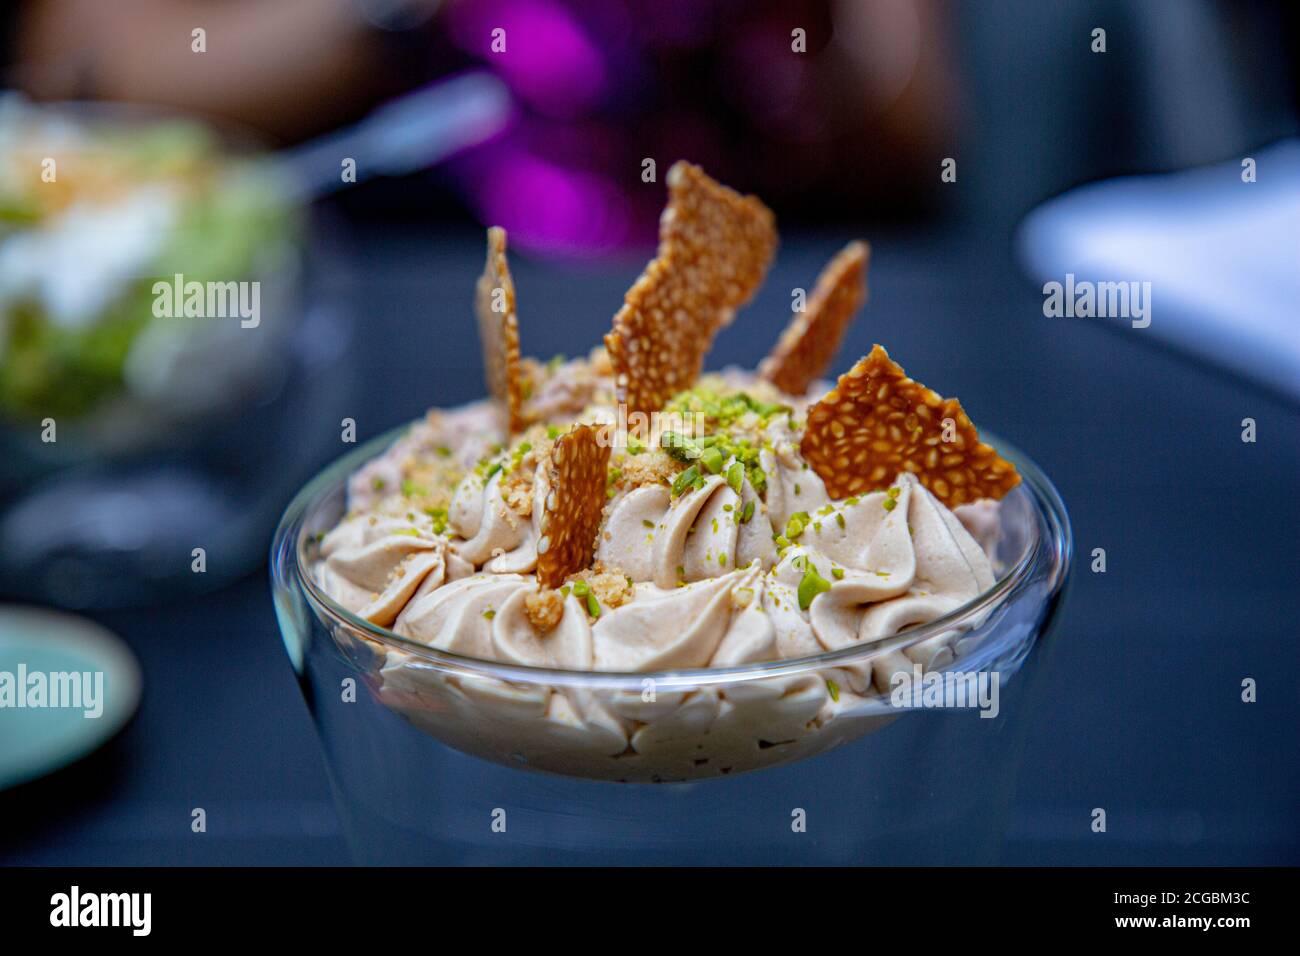 Dessert. Cream with sesame chips is in the glass. Stock Photo